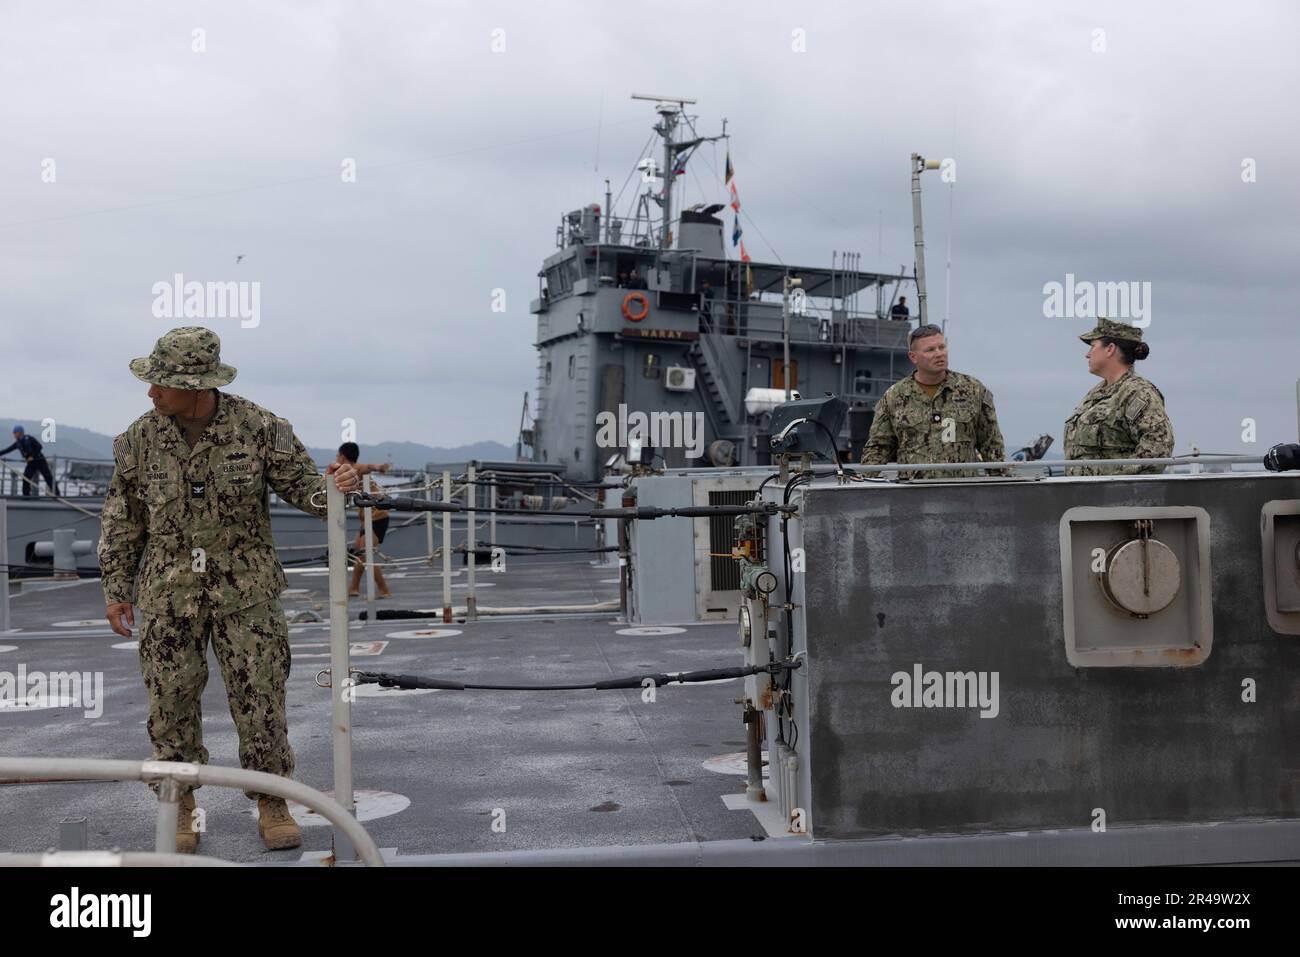 U.S. Navy Sailors stand on a Navy Roll-On/Roll-Off Discharge Facility as Philippine BRP Waray LC-288 moors next to it during a combined joint logistics over-the-shore offload in preparation for Balikatan 23 at Camp Agnew, Casiguran, Philippines, April 6, 2023. Balikatan is an annual exercise between the Armed Forces of the Philippines and U.S. military designed to strengthen bilateral interoperability, capabilities, trust, and cooperation built over decades shared experiences. Stock Photo